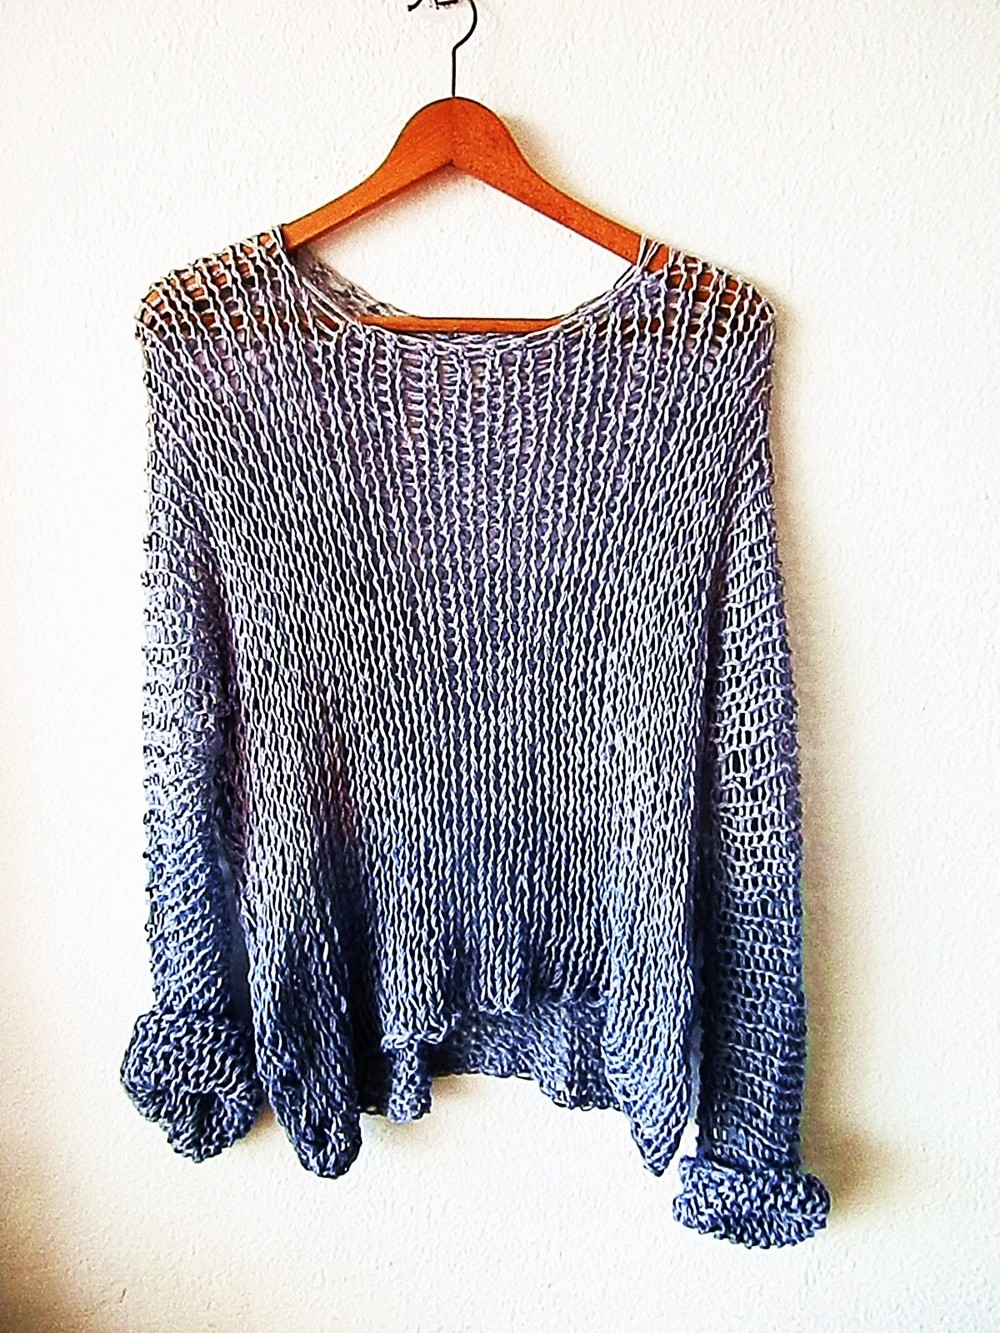 Cotton sweater, grunge clothing, gray dyed jumper...